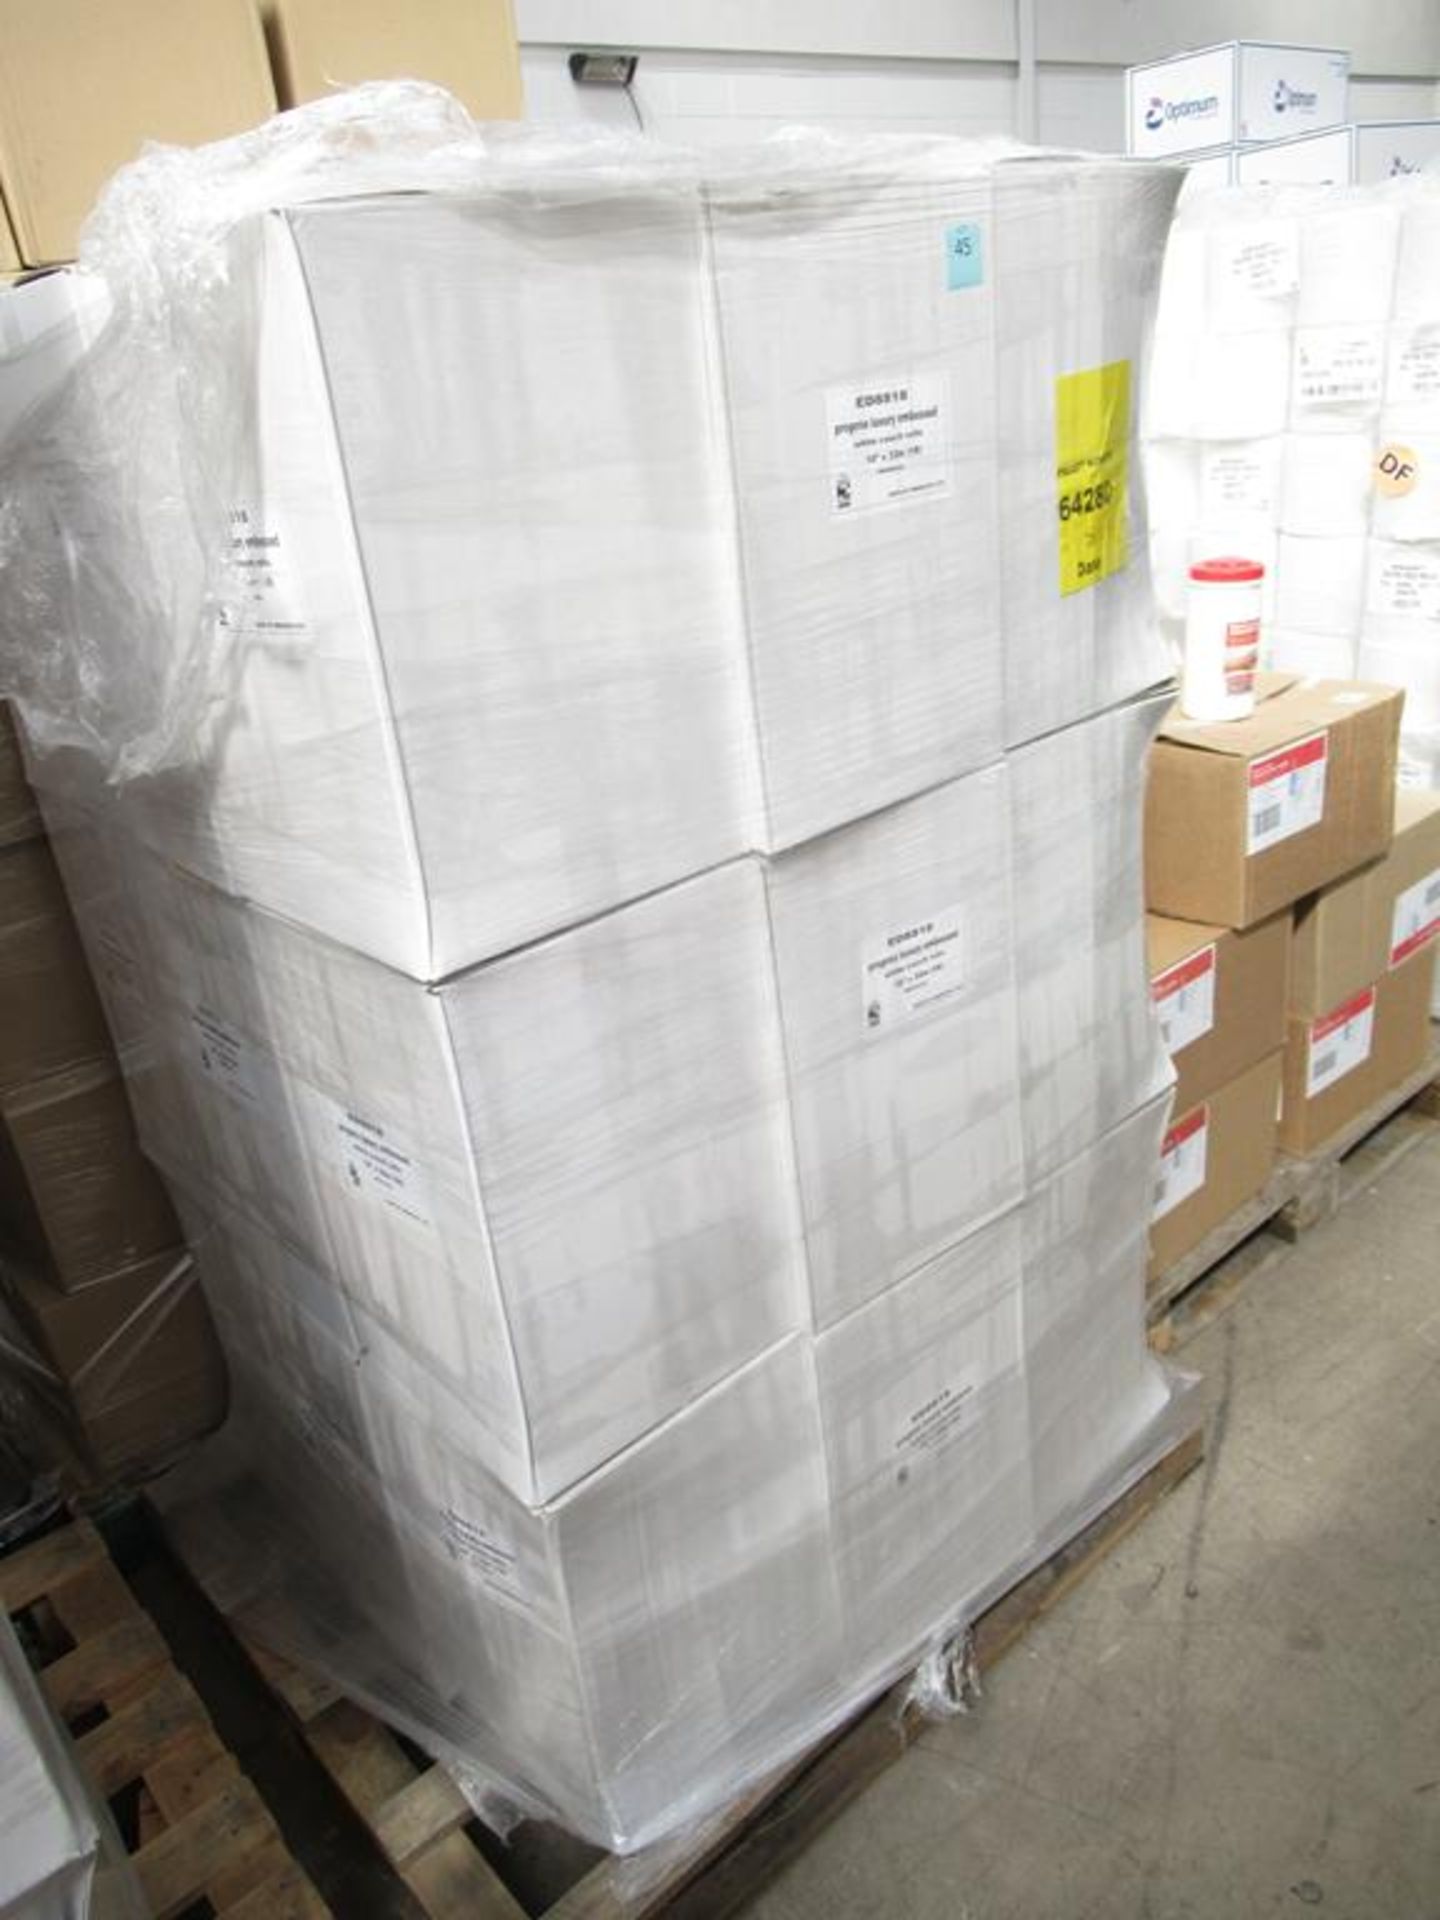 Pallet to contain 27 boxes of Progena Luxury Embossed White Couch Rolls (10" x 32m per roll, 18 roll